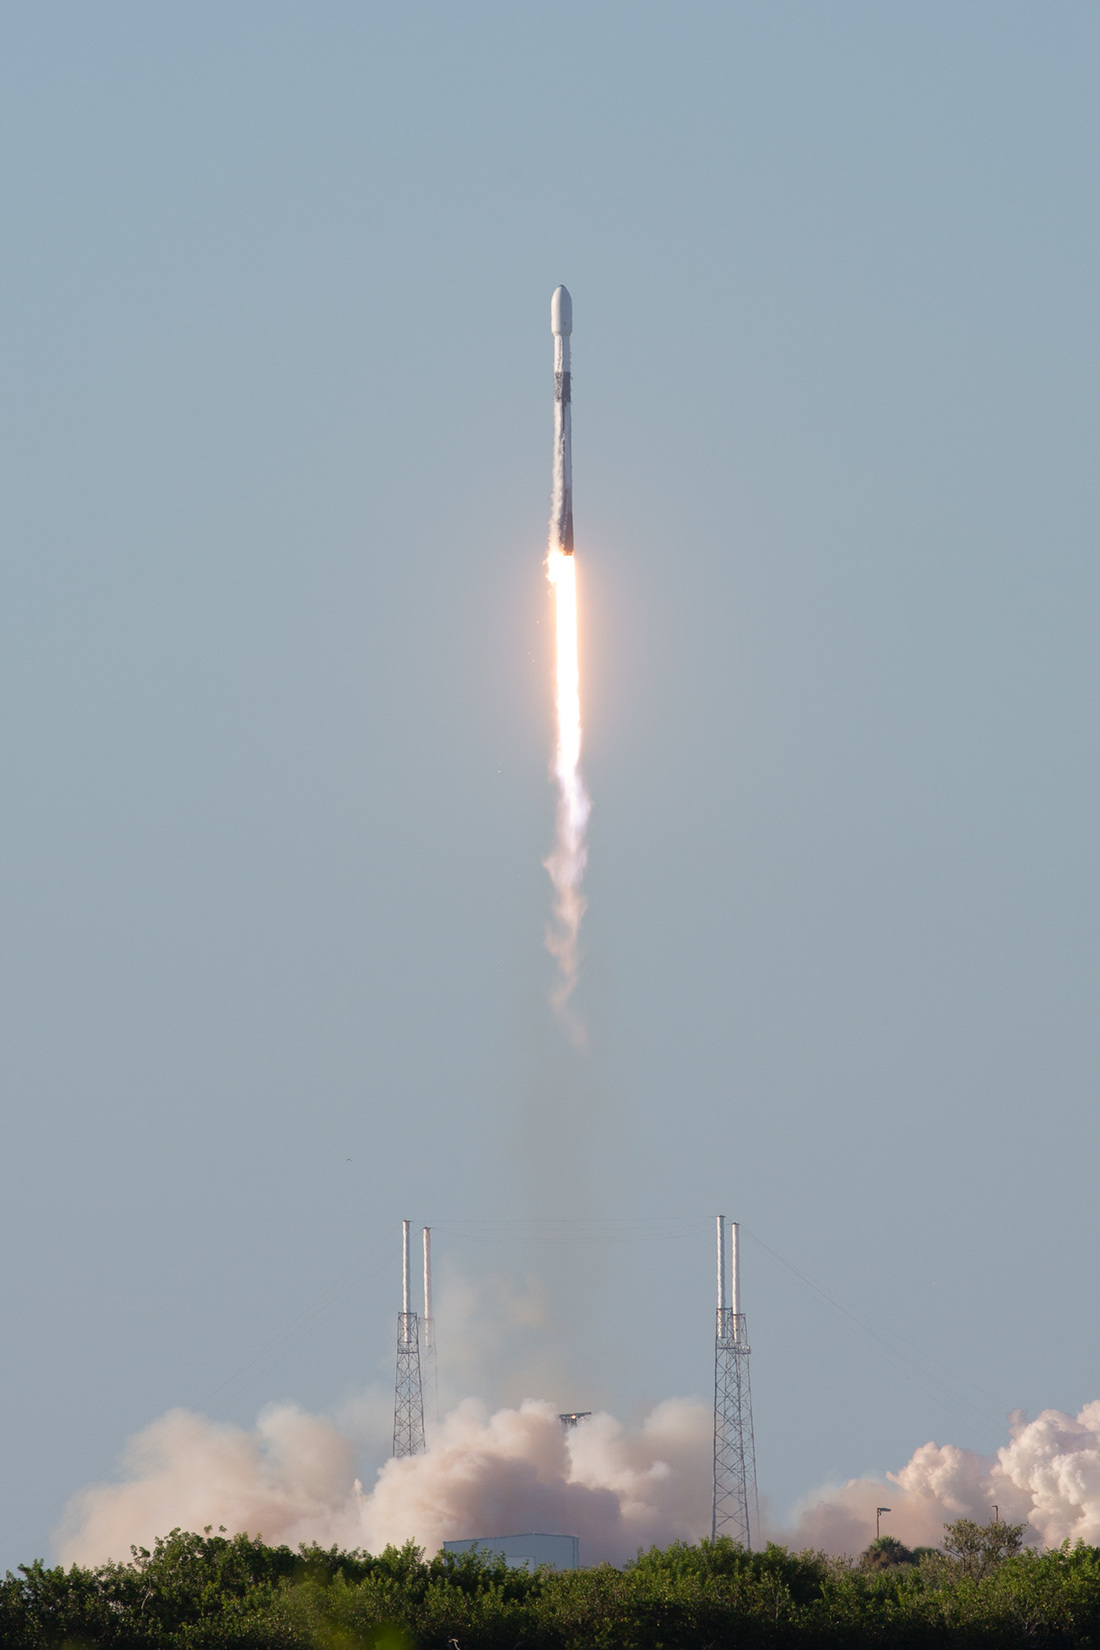 A closeup image of the SpaceX Falcon 9 rocket carrying KPLO shortly after leaving the launch pad